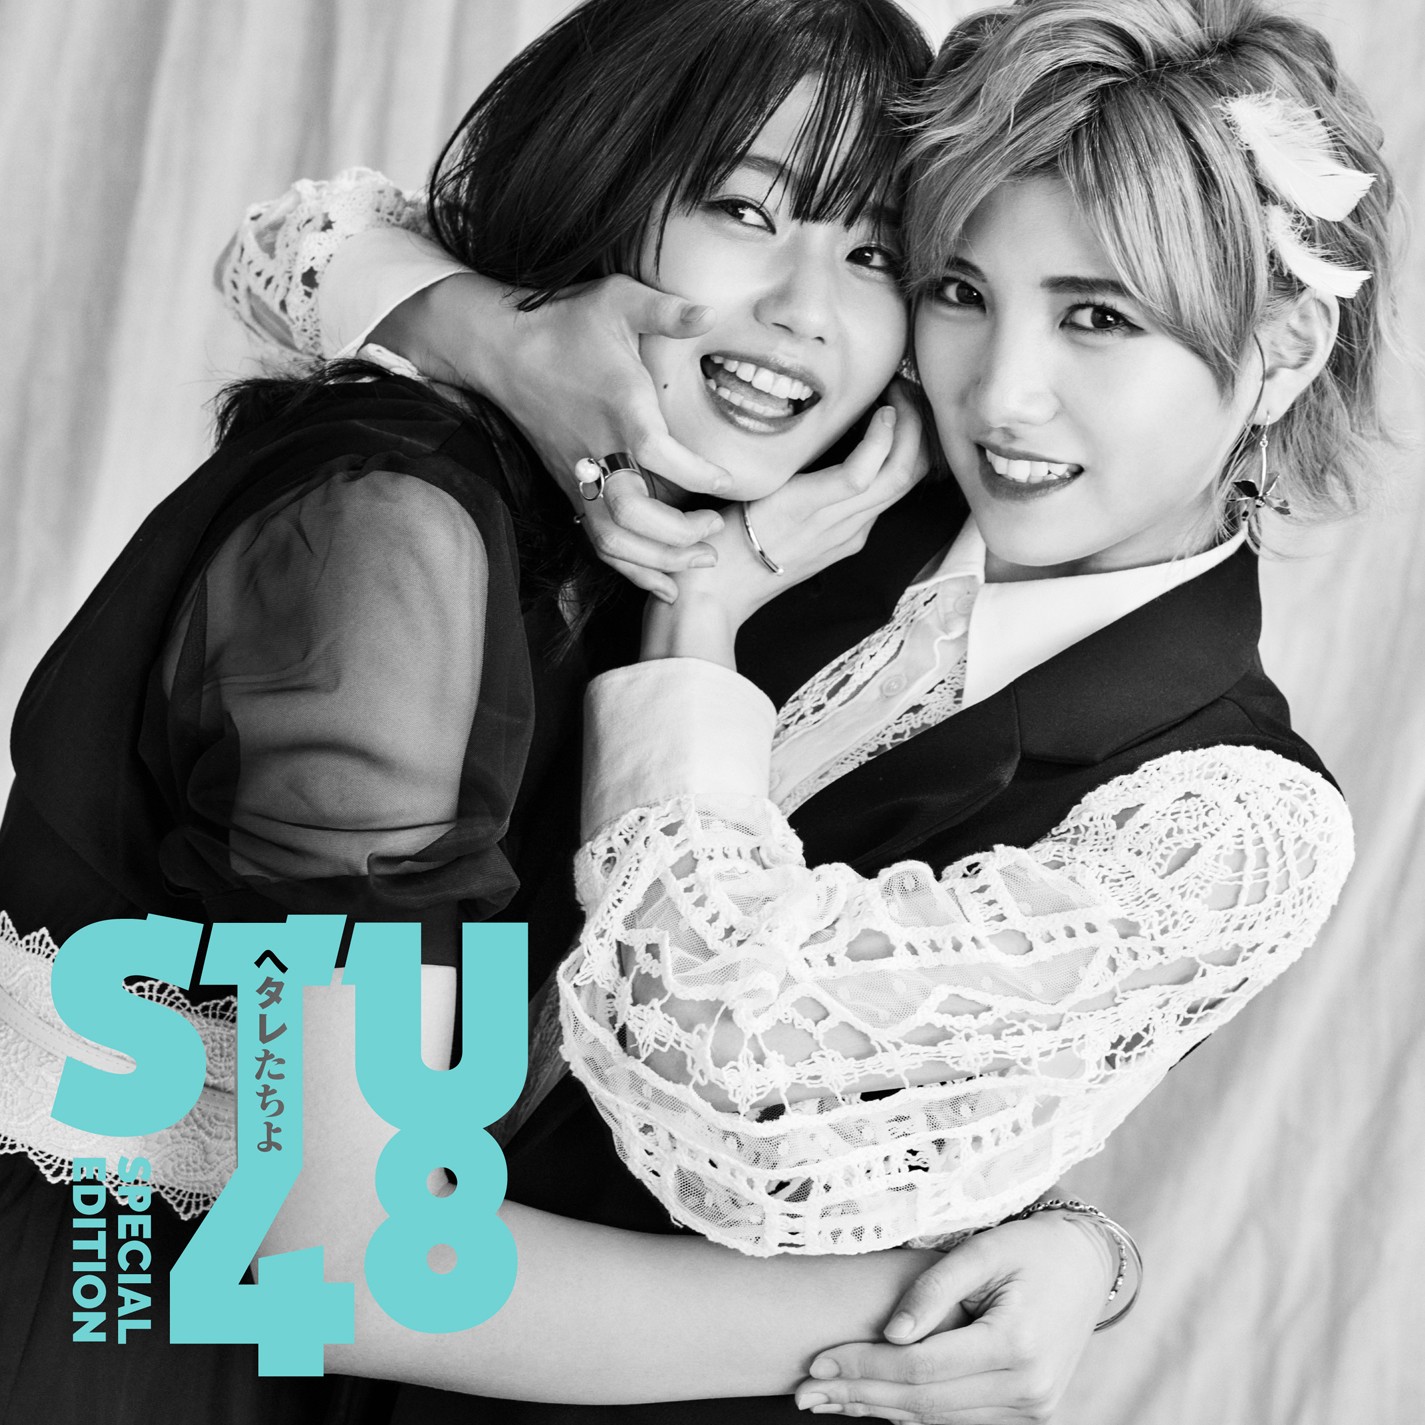 STU48 – ヘタレたちよ Special Edition [24bit Lossless + MP3 320 / WEB] [2021.10.20]